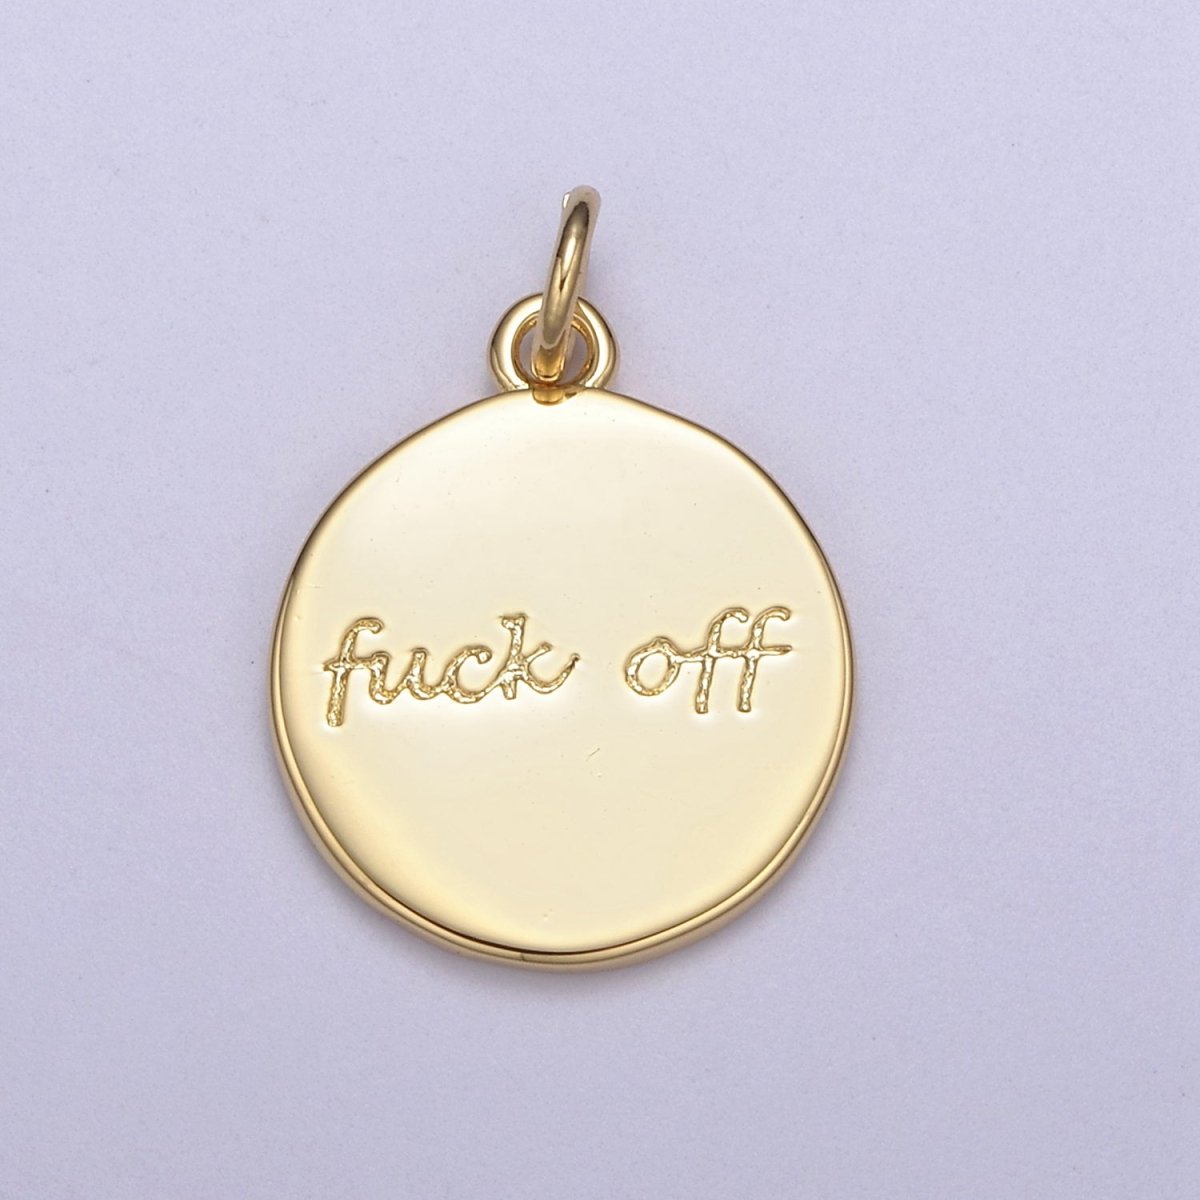 Dainty Fuck Off Charm Round Coin Disc Charm Fuck Jewelry Personalized Necklace, Swear Word Funny Add on Charm N-636 - DLUXCA